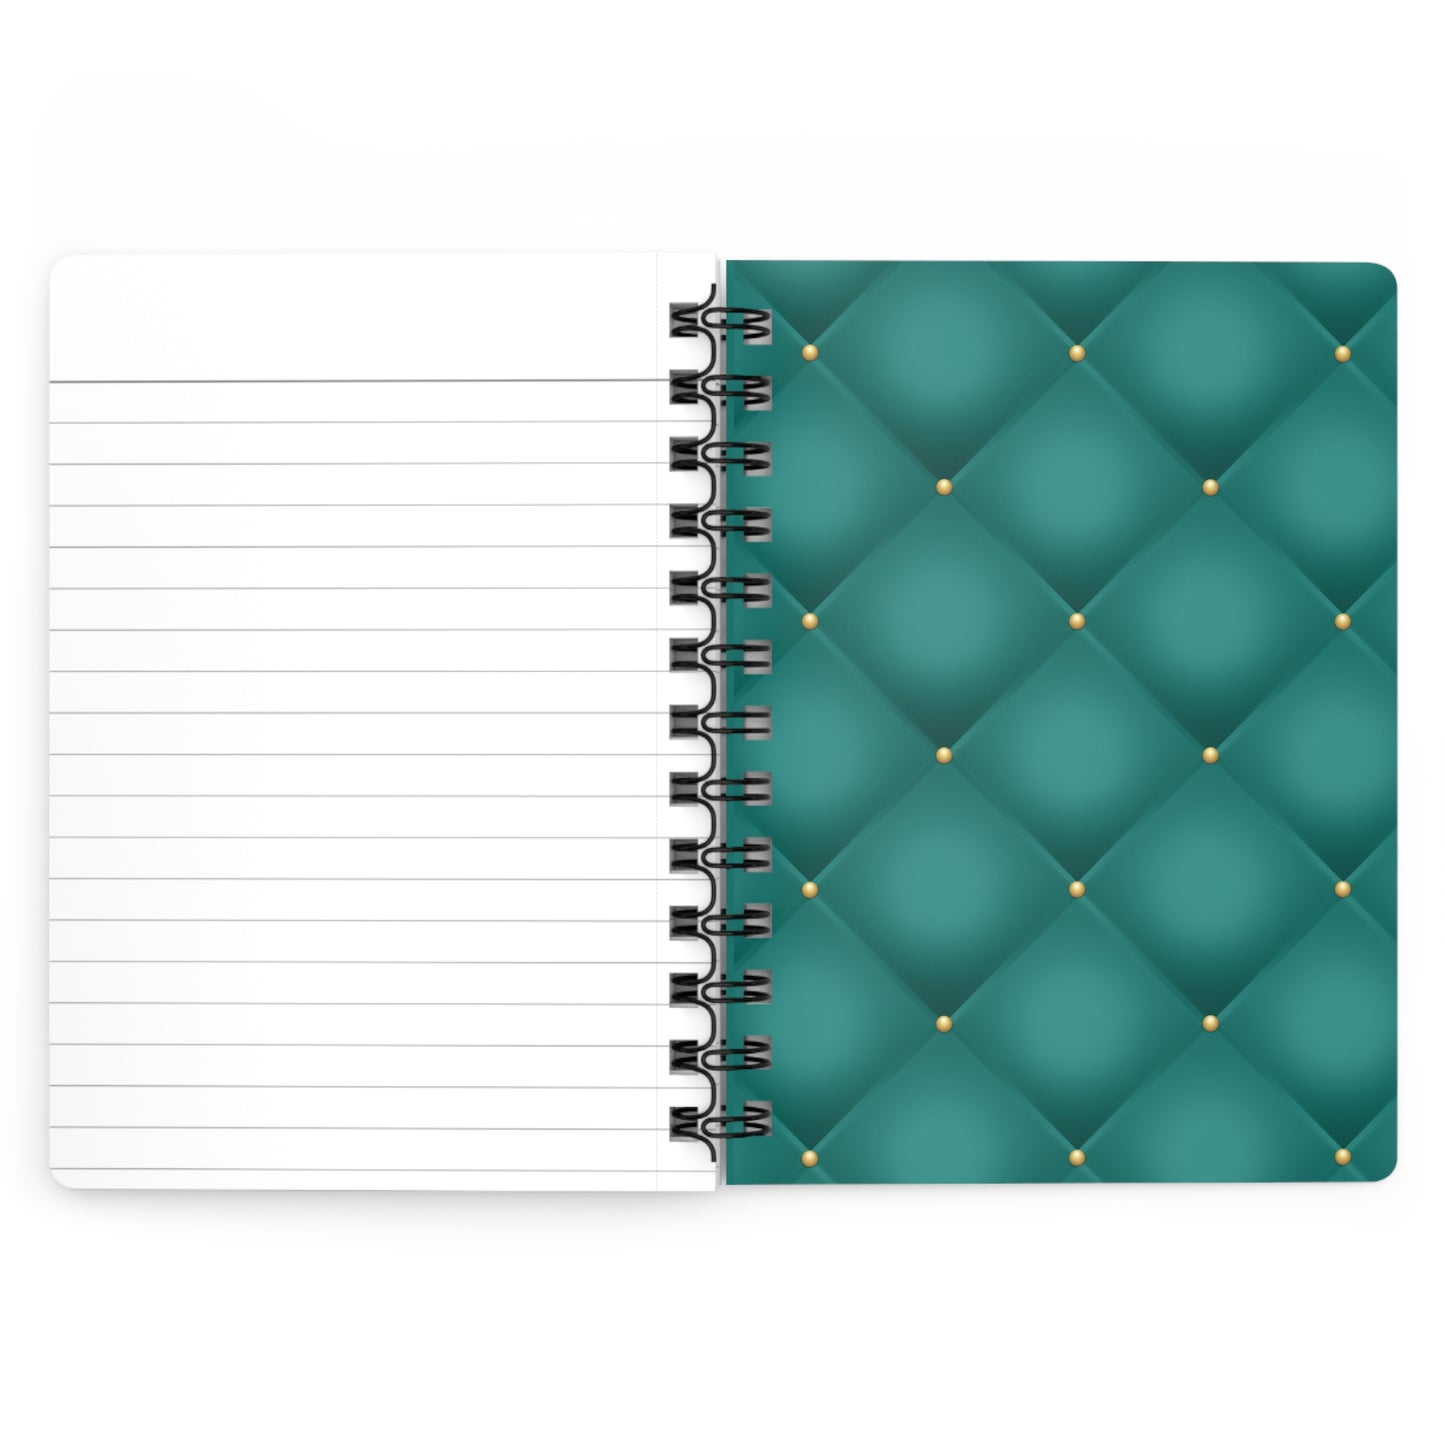 Stop for one minute Tufted Print Turquoise and Gold Spiral Bound Journal